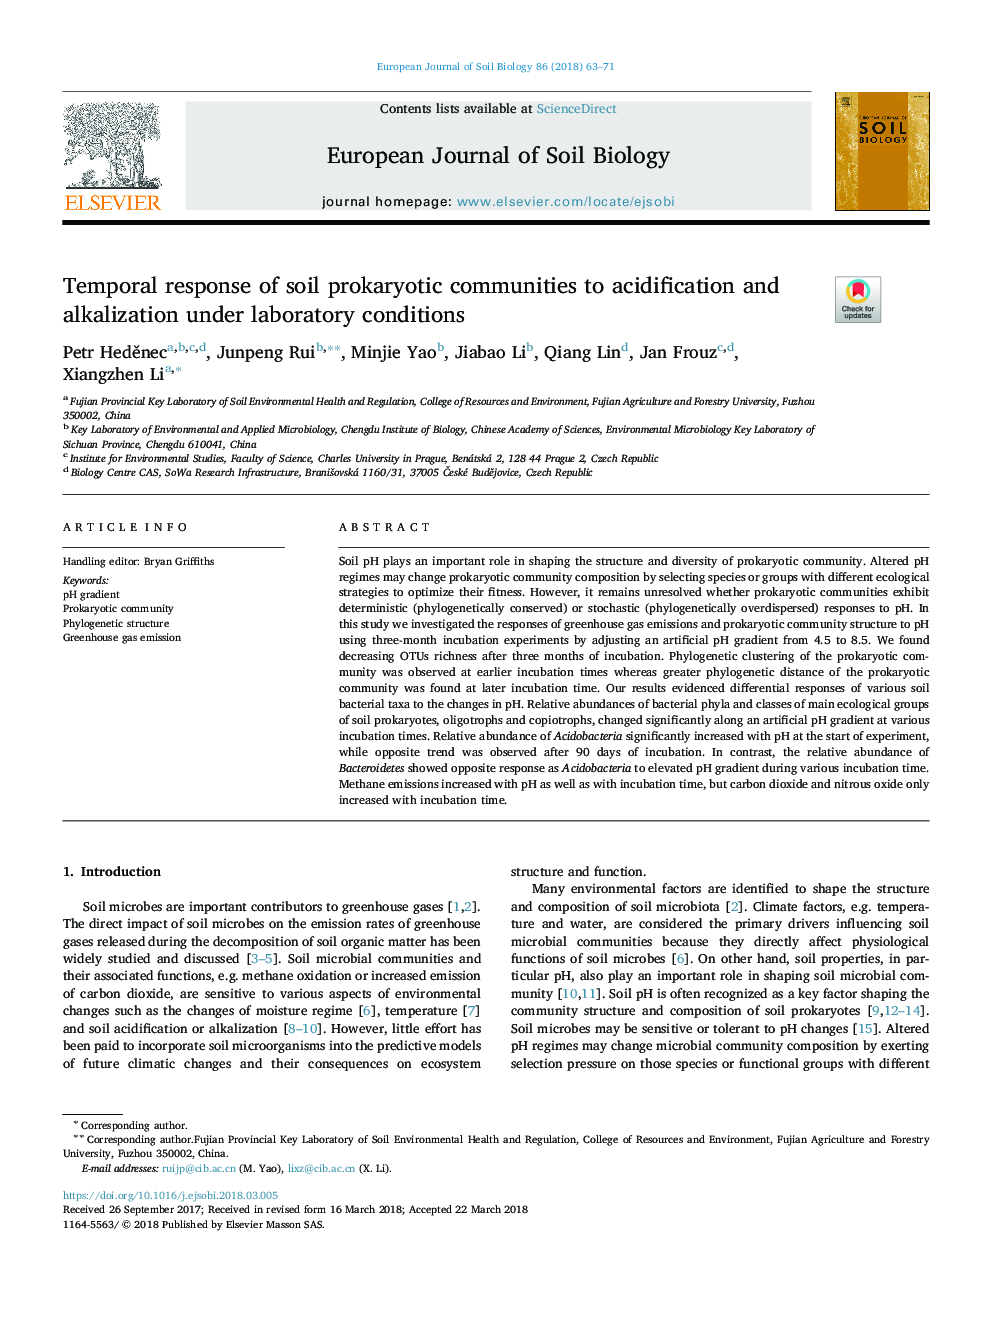 Temporal response of soil prokaryotic communities to acidification and alkalization under laboratory conditions